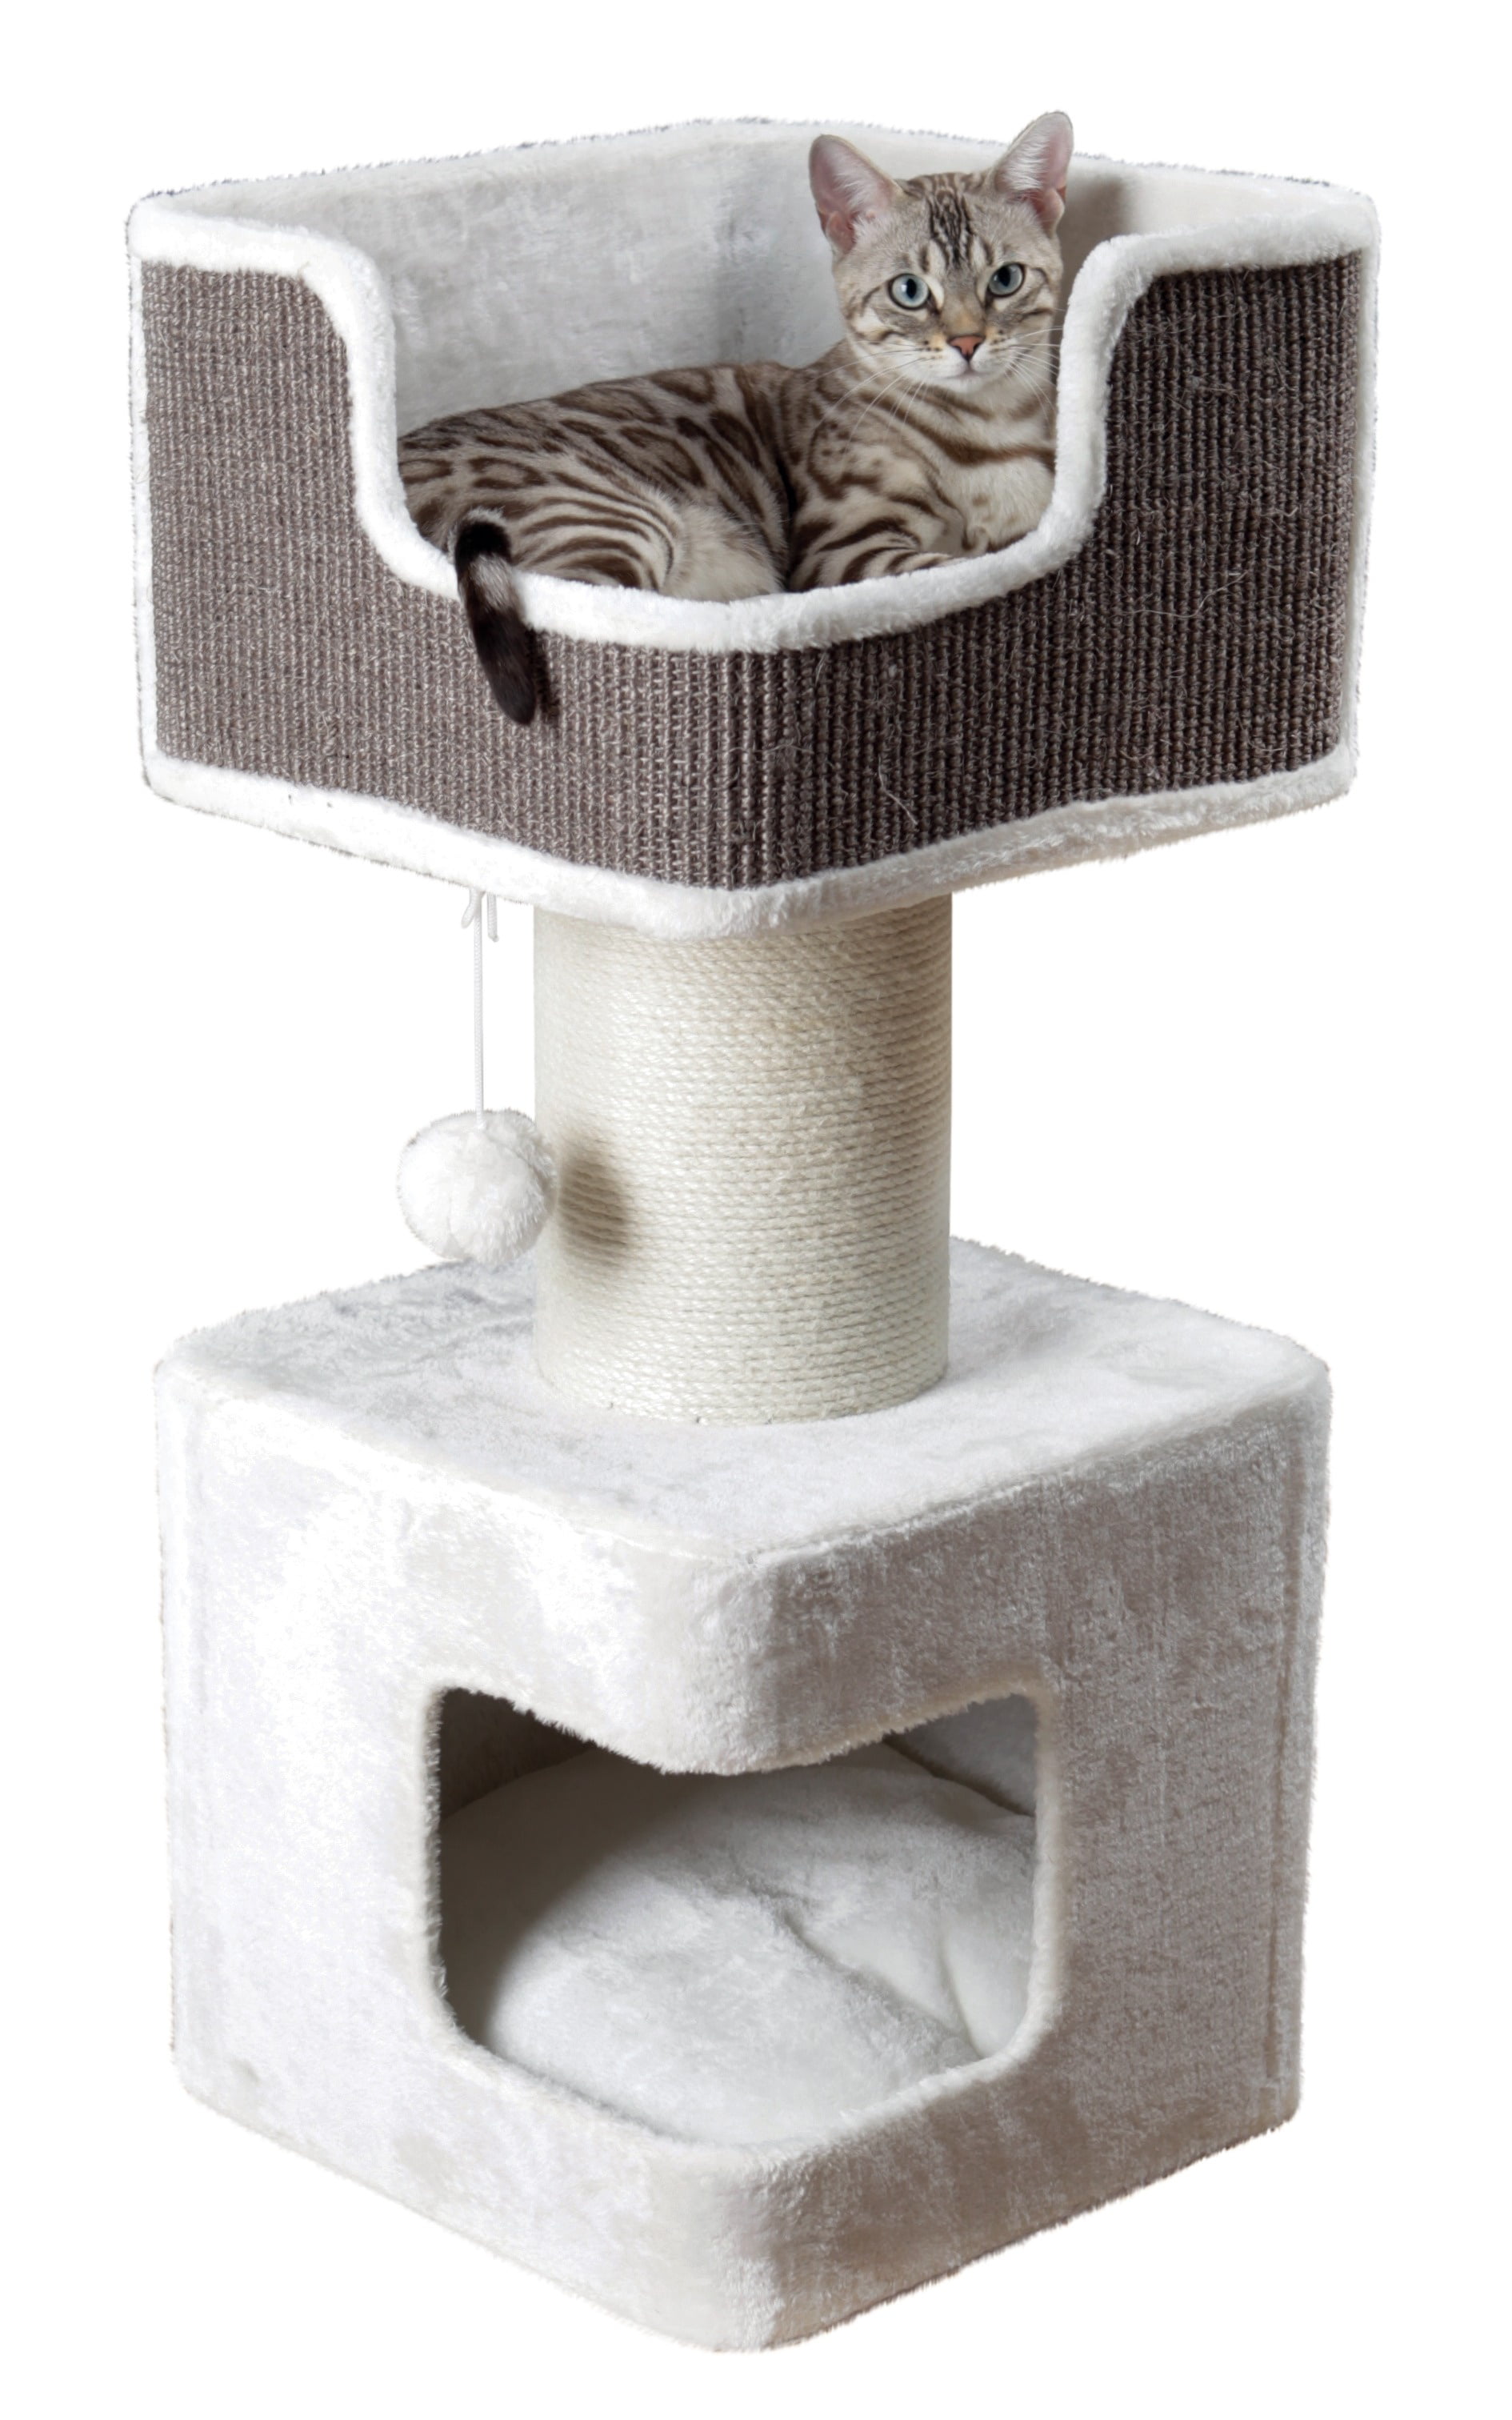 Wellhome Cat Tower Cat Tree Activity Centre Sisal Covered Cat Scratch Post with Hammock Perches Platform and Toy Mouse 120cm Grey